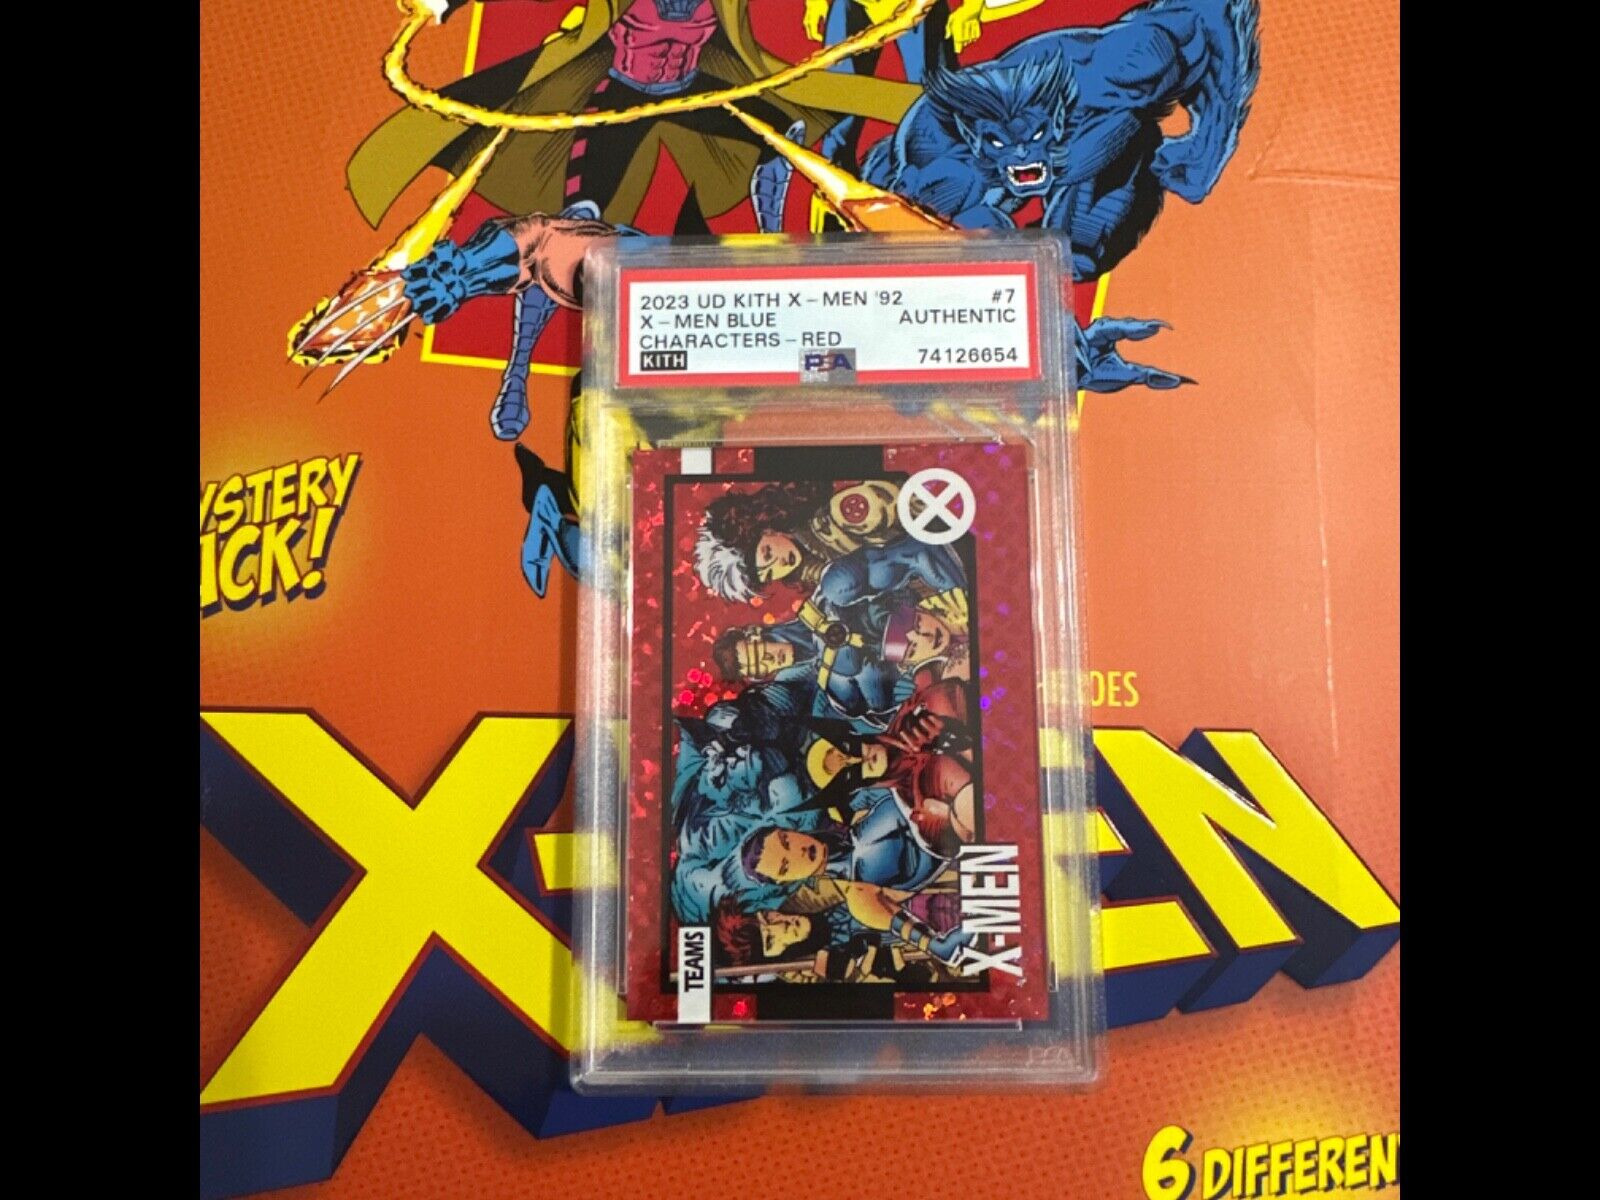 2023 UD Kith X- Men 92 Characters Red #7 Asics PSA Graded Card 1 Of 100